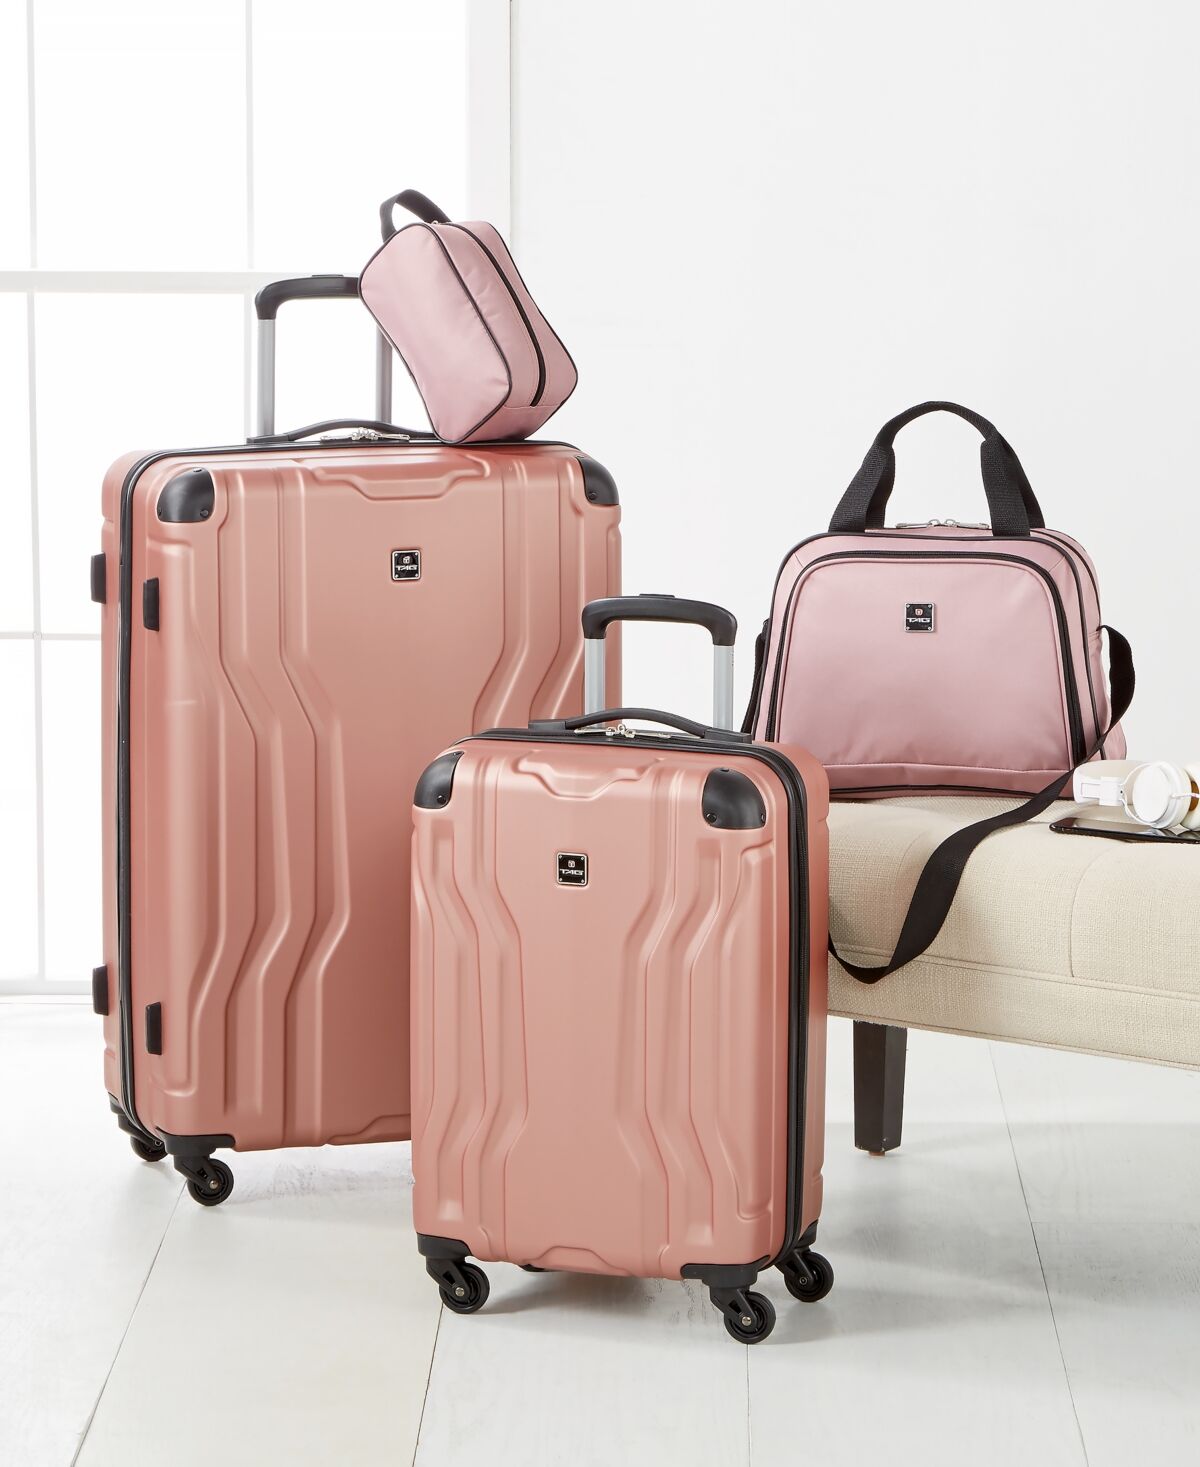 Tag Legacy 4-Pc. Luggage Set, Created for Macy's - Pink